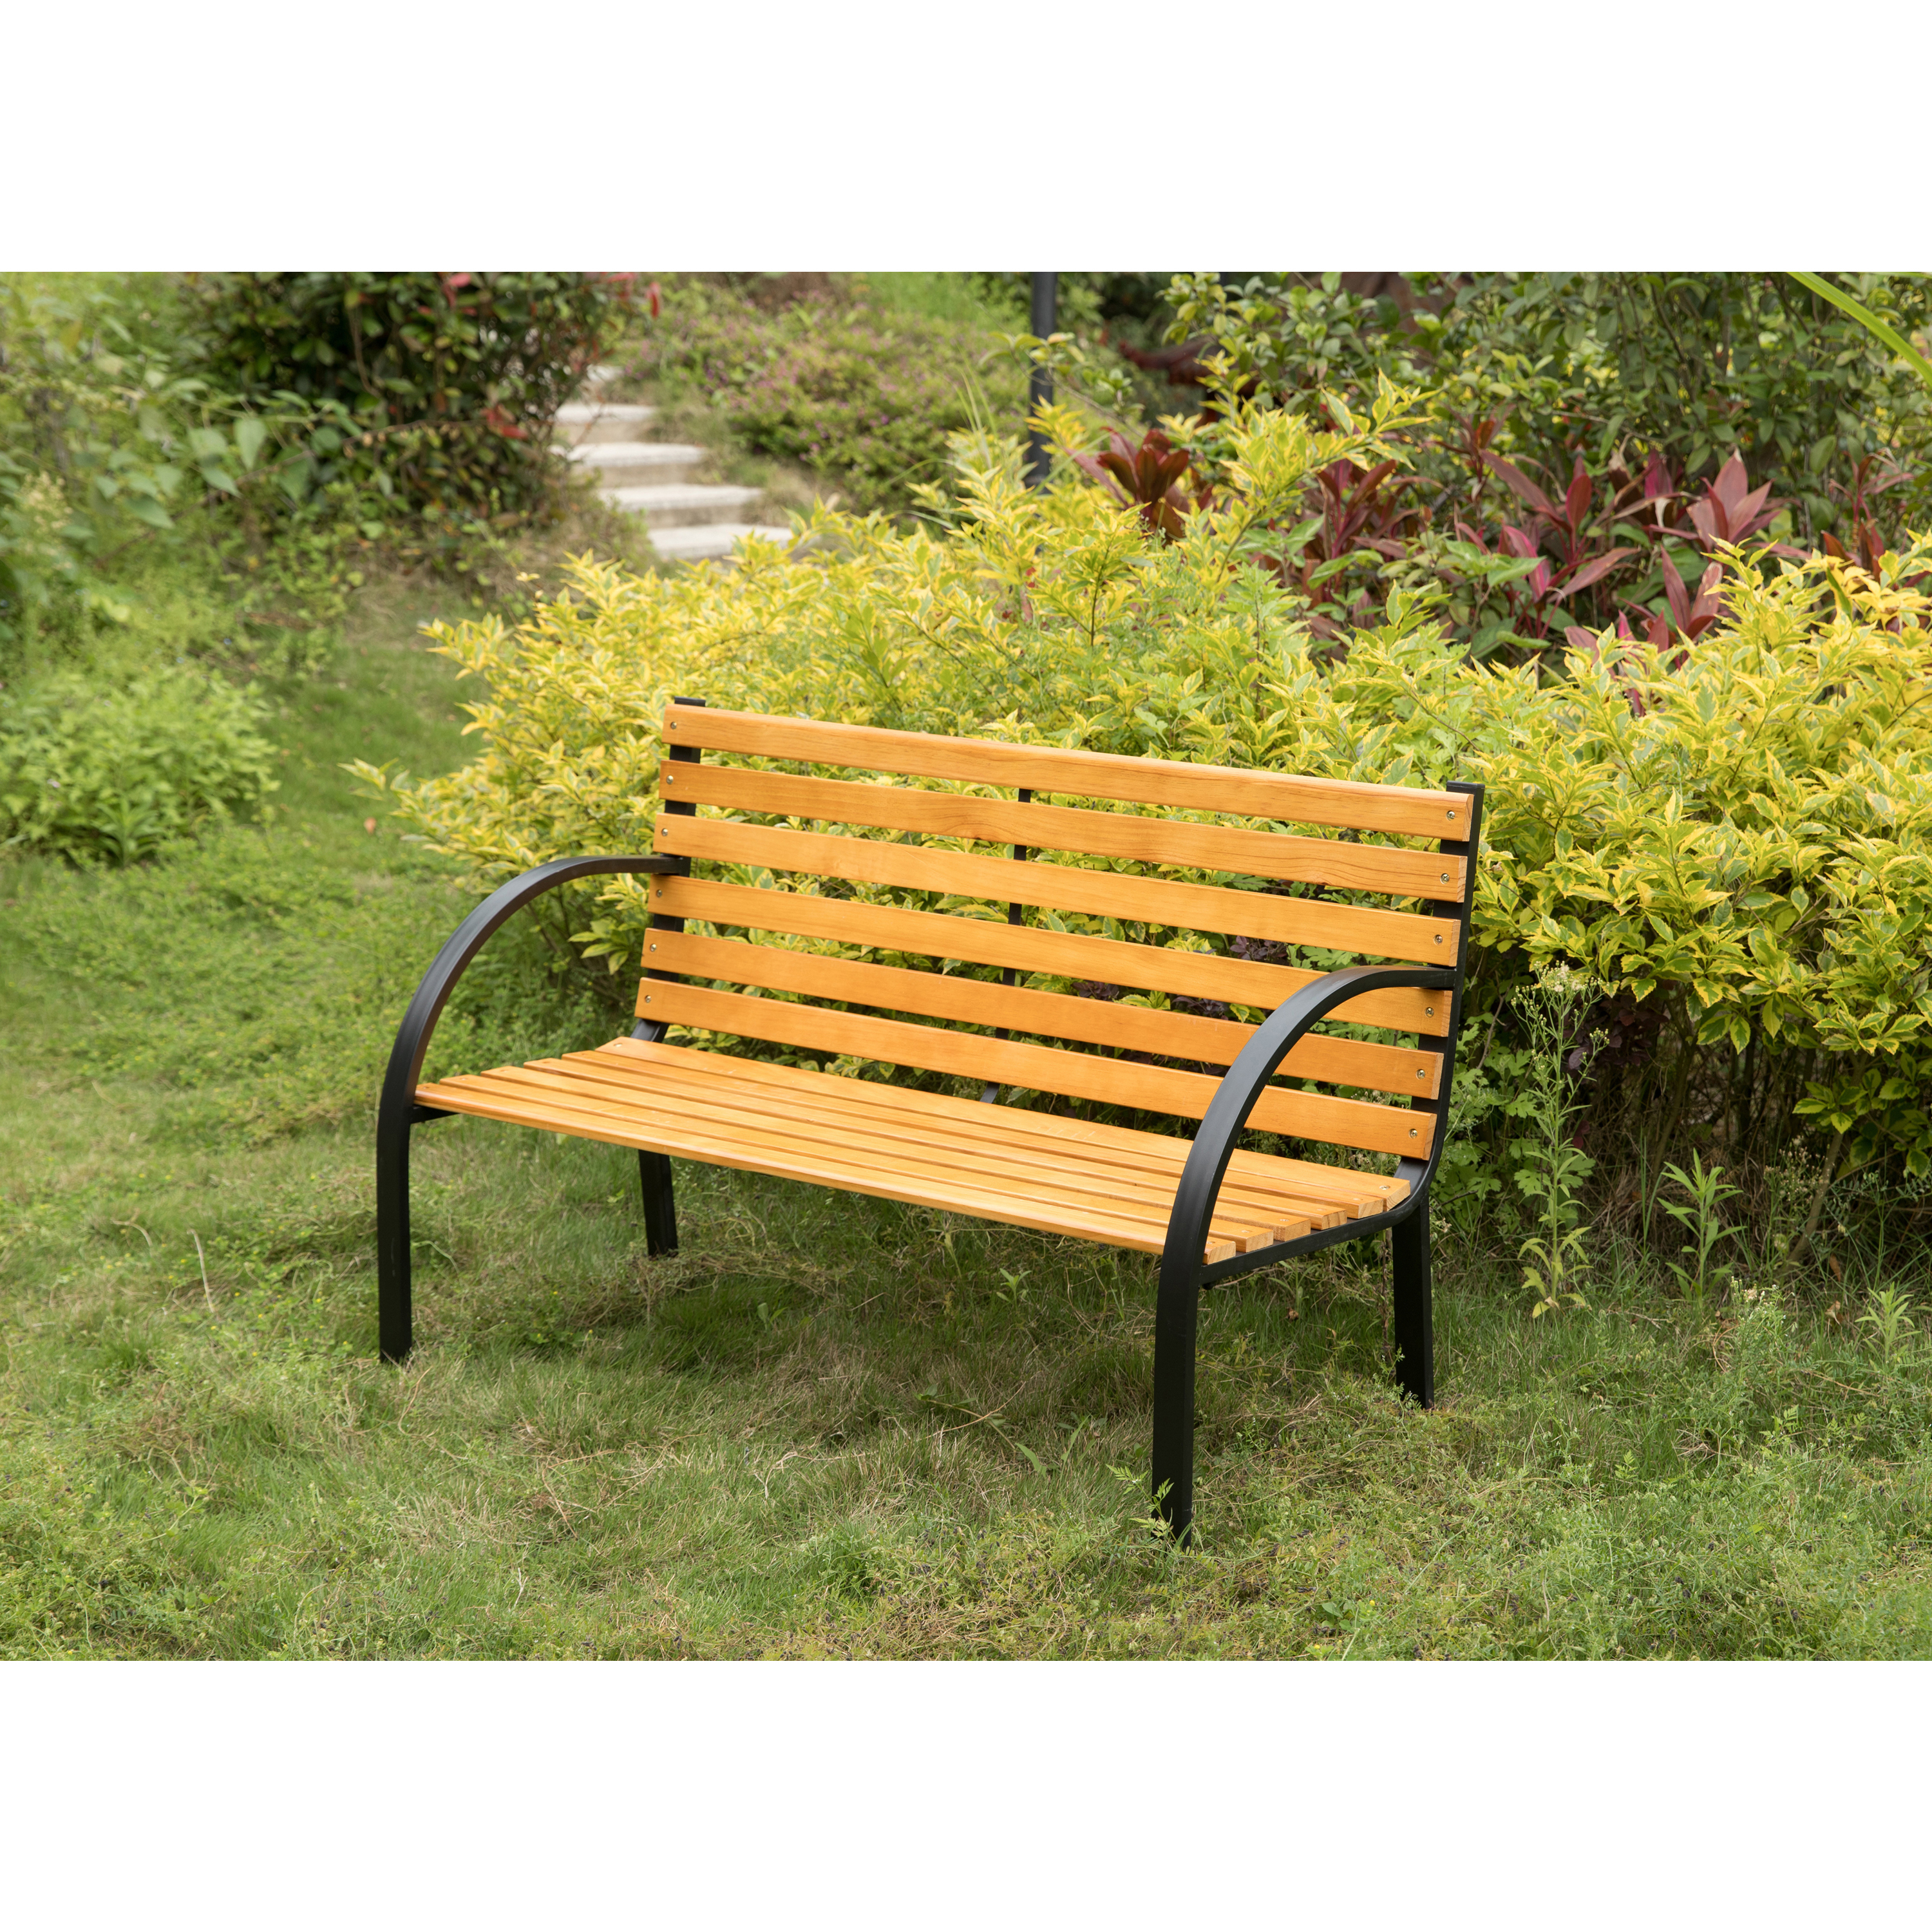 Classical Wooden Slats Outdoor Park Bench With Steel Frame, Seating Bench For Yard, Patio, Garden, Balcony, And Deck